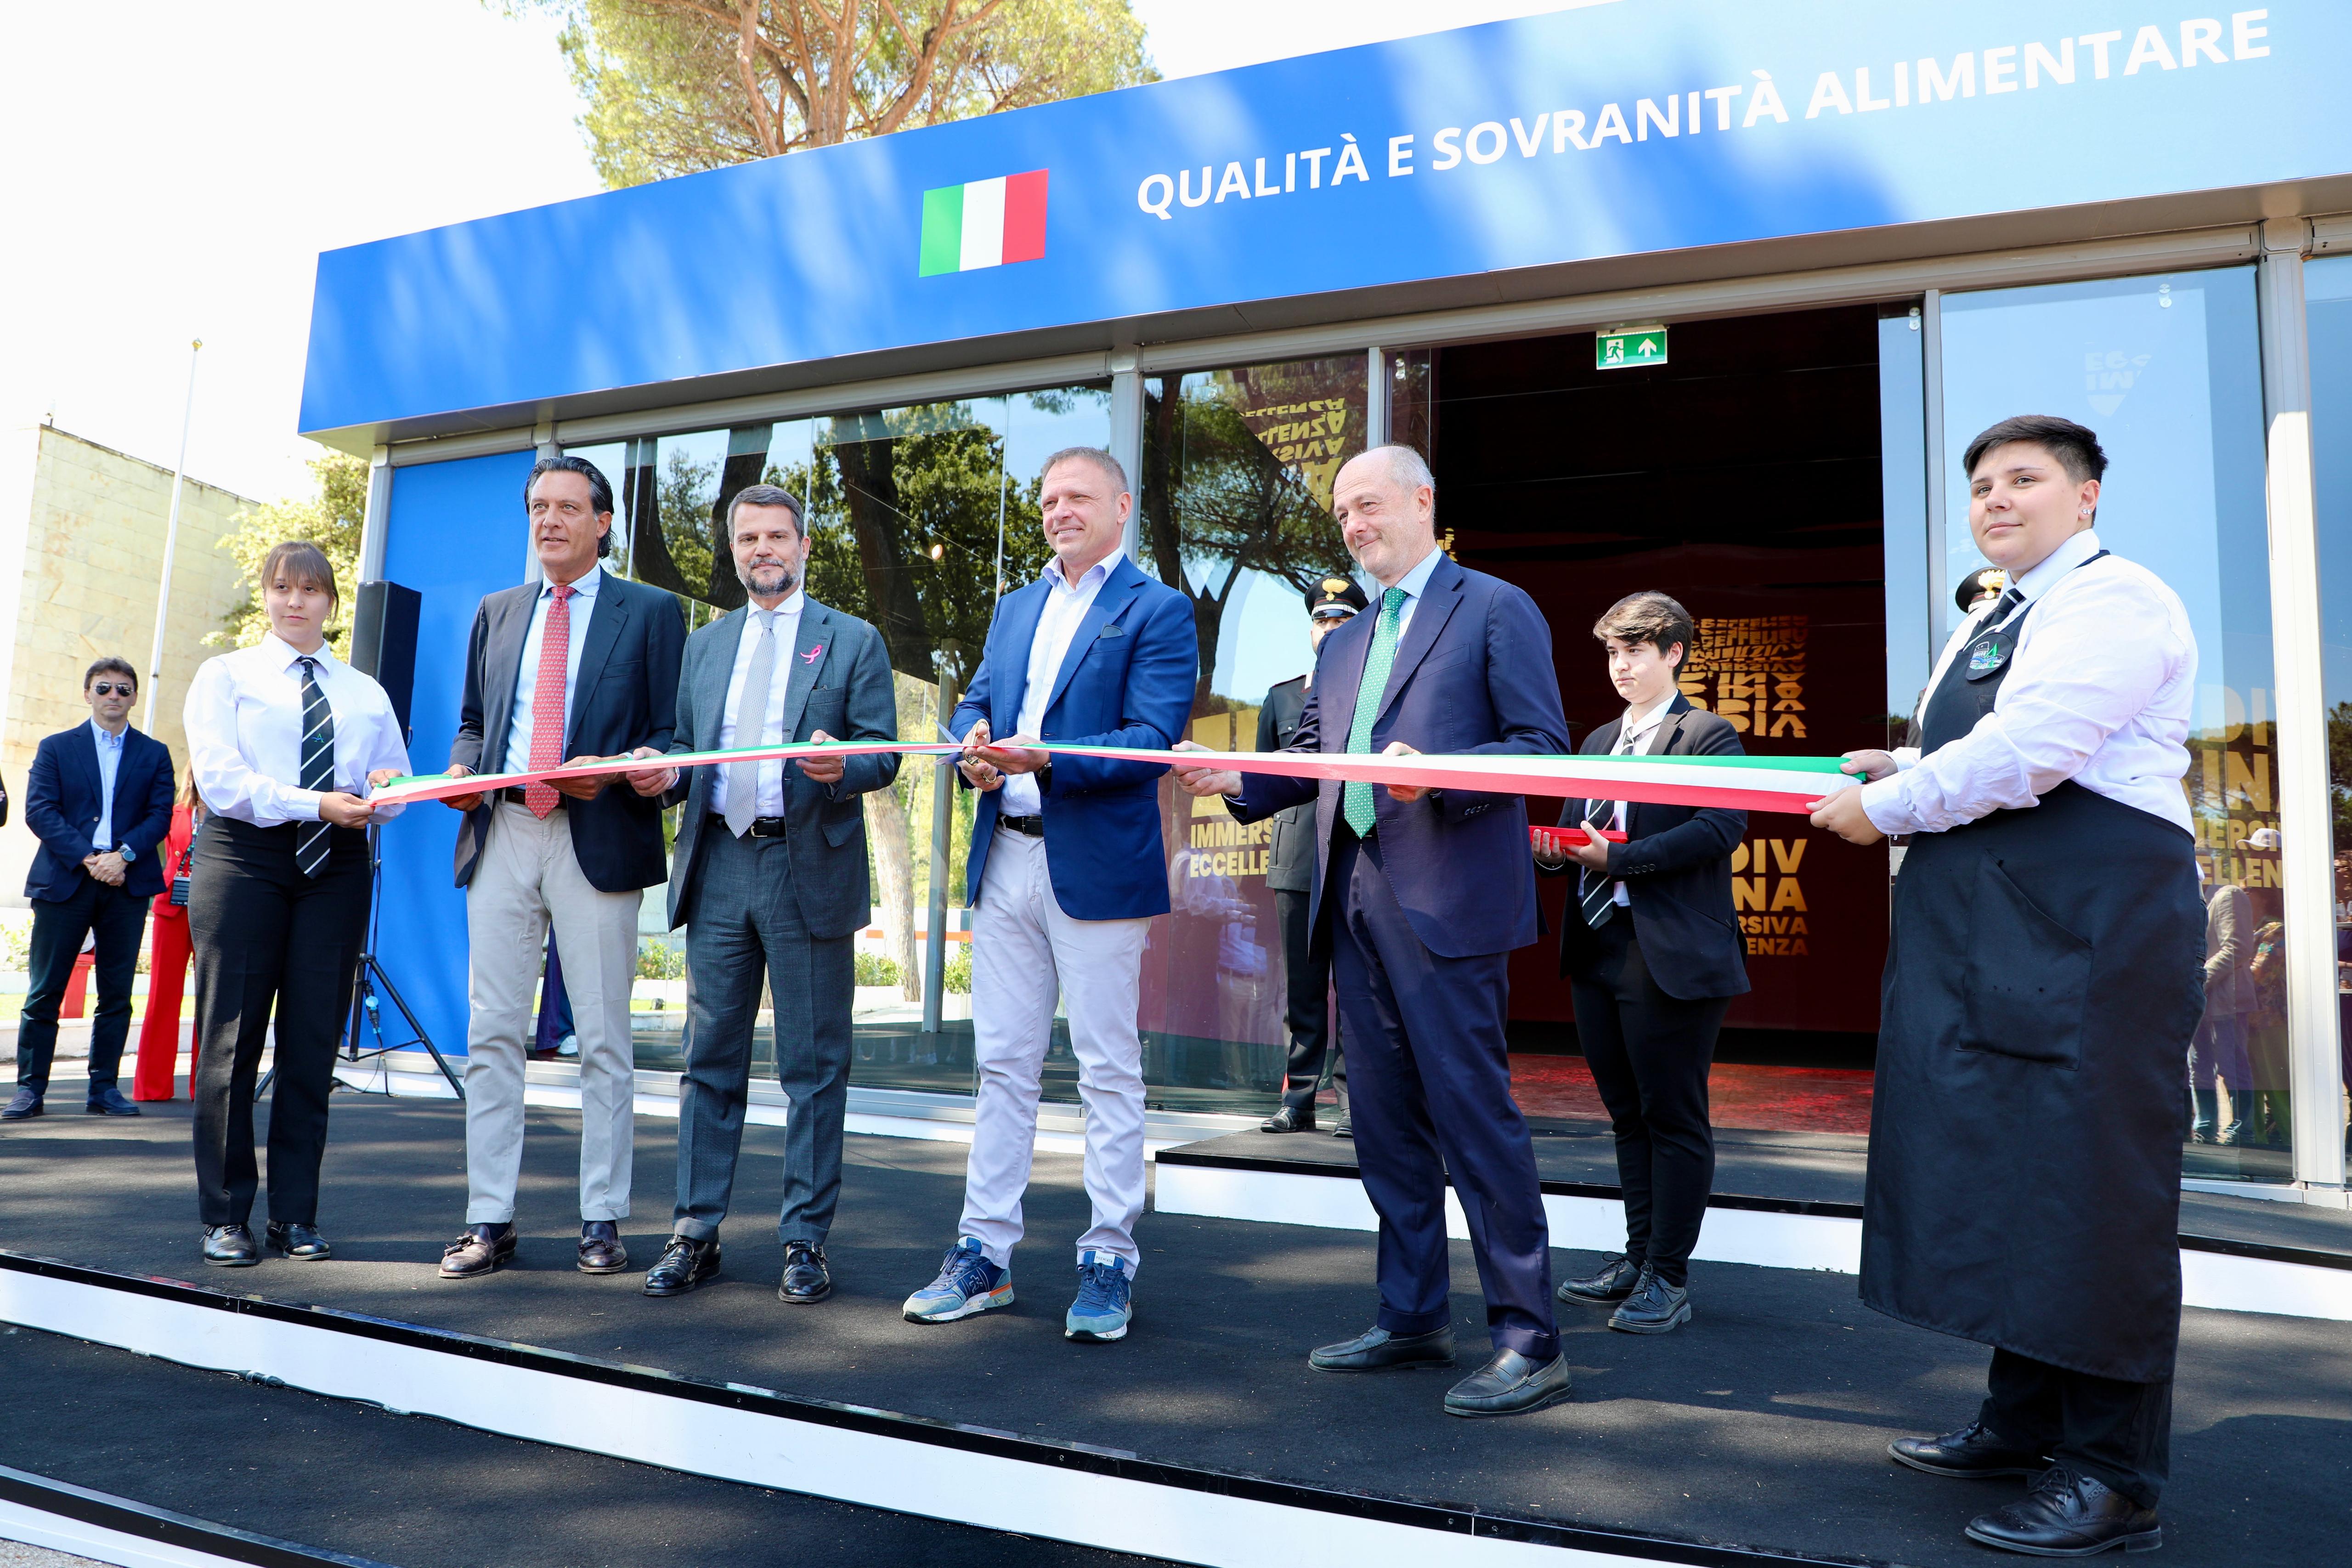 BNL Tennis Internationals of Italy.  “Divina” inaugurated, the space dedicated to Italian excellence curated by the Ministry of Agriculture and Food Sovereignty